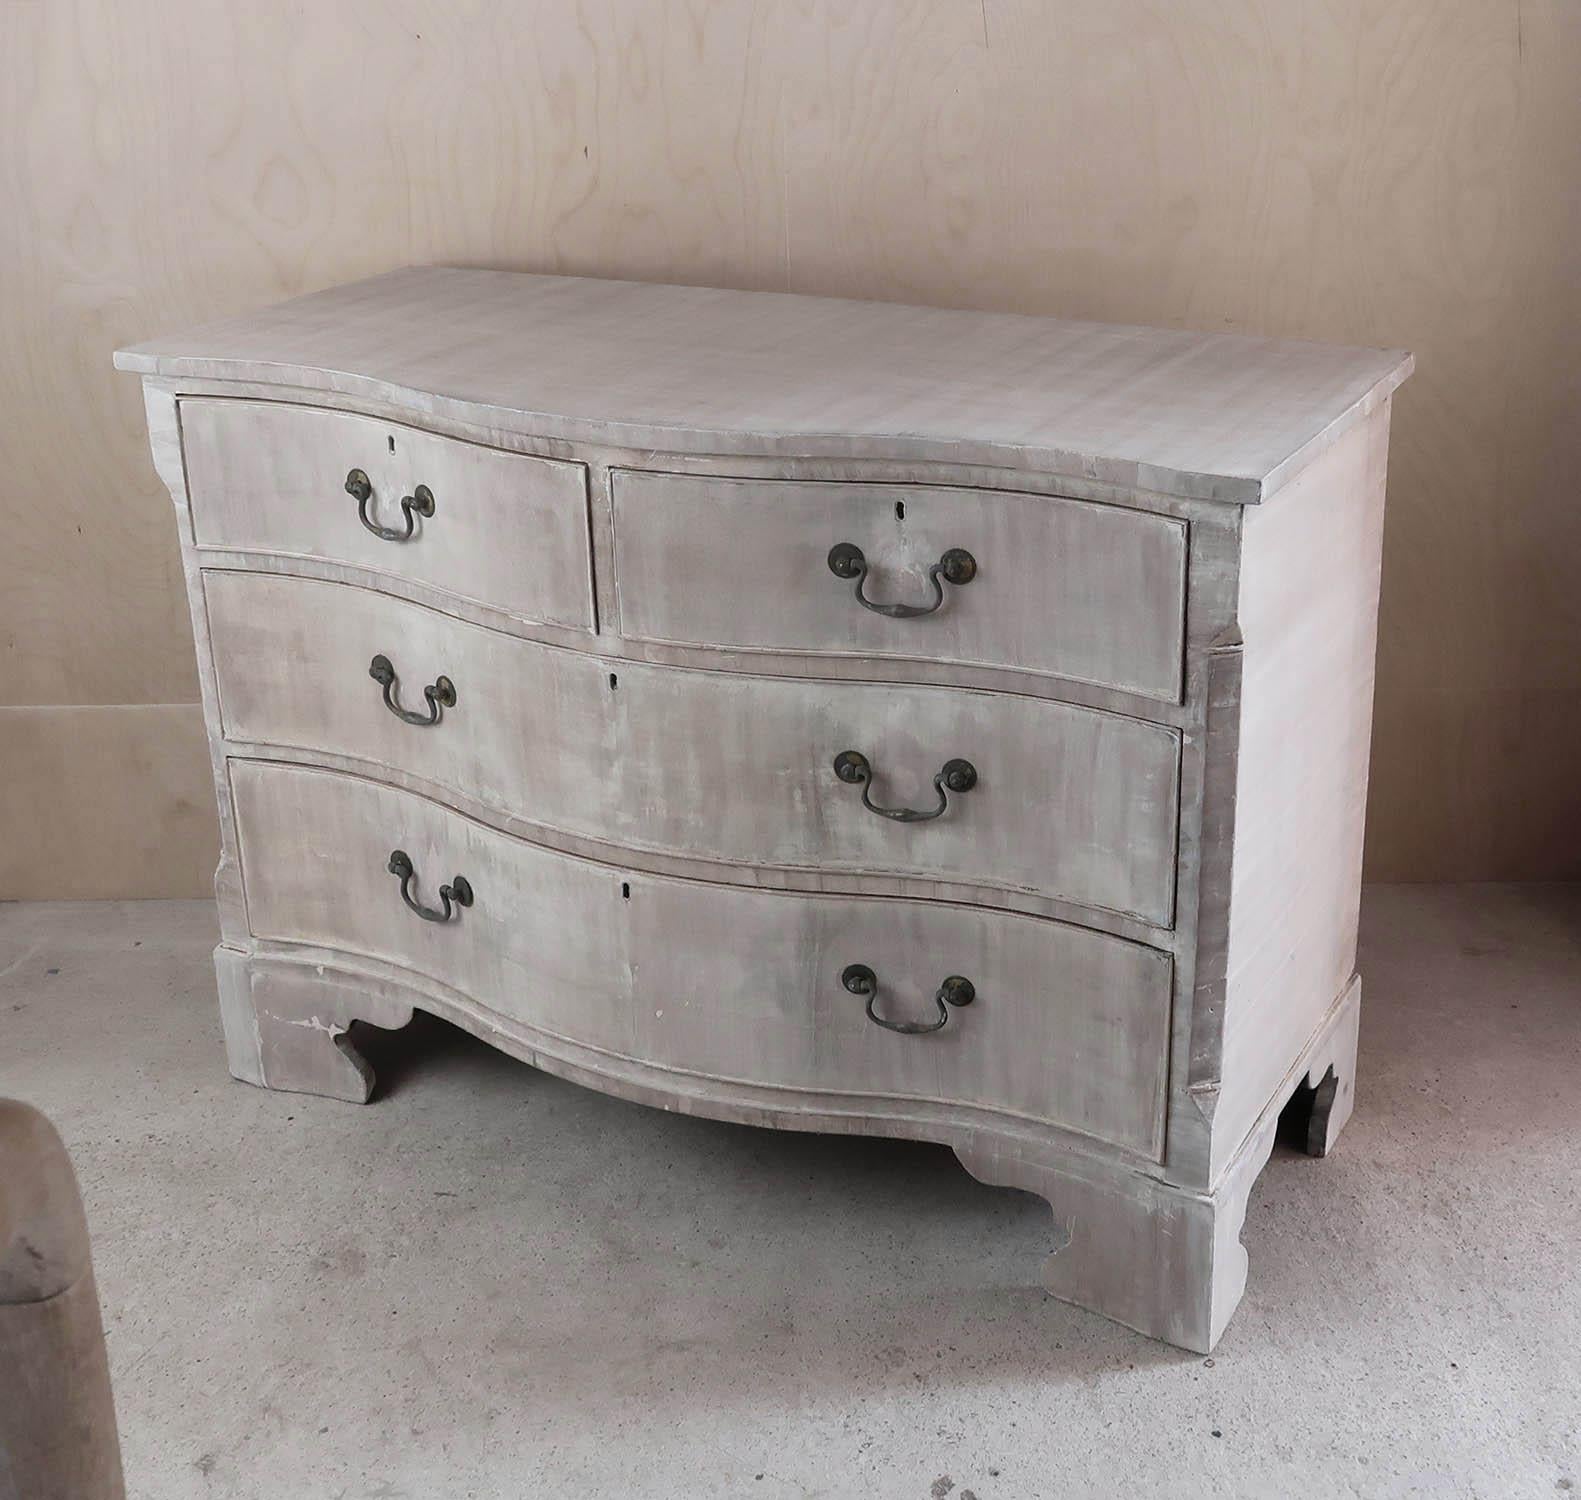 Wonderful commode or chest of drawers.

Bleached and lime washed tropical hardwood.

Lovely shaped serpentine front

Veneered drawer fronts. Some historical small patches on the drawer fronts

Original bracket feet

Original blue paper lining to